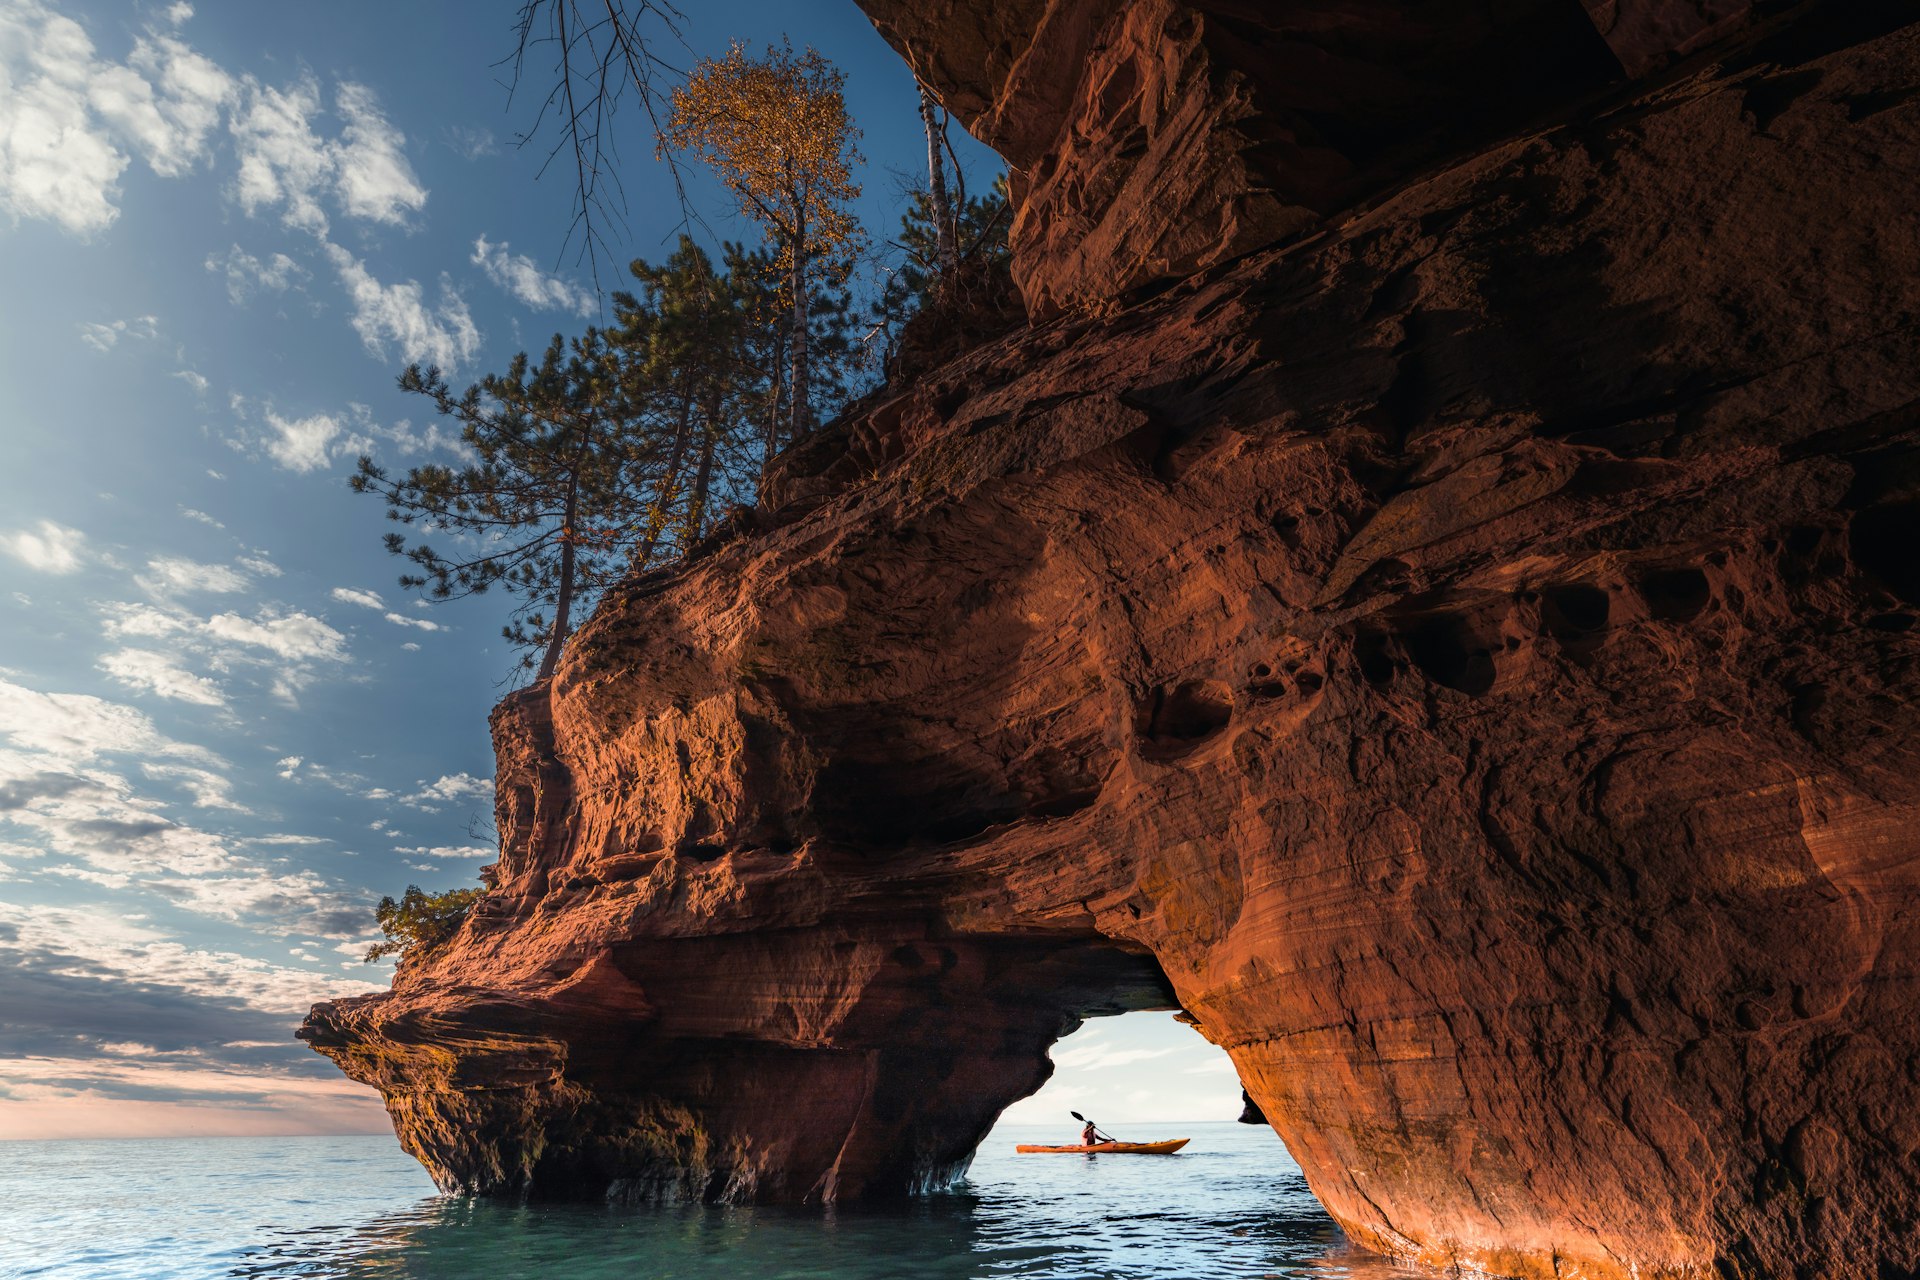 A kayaker viewed through a sea arch of red rock with some trees on top